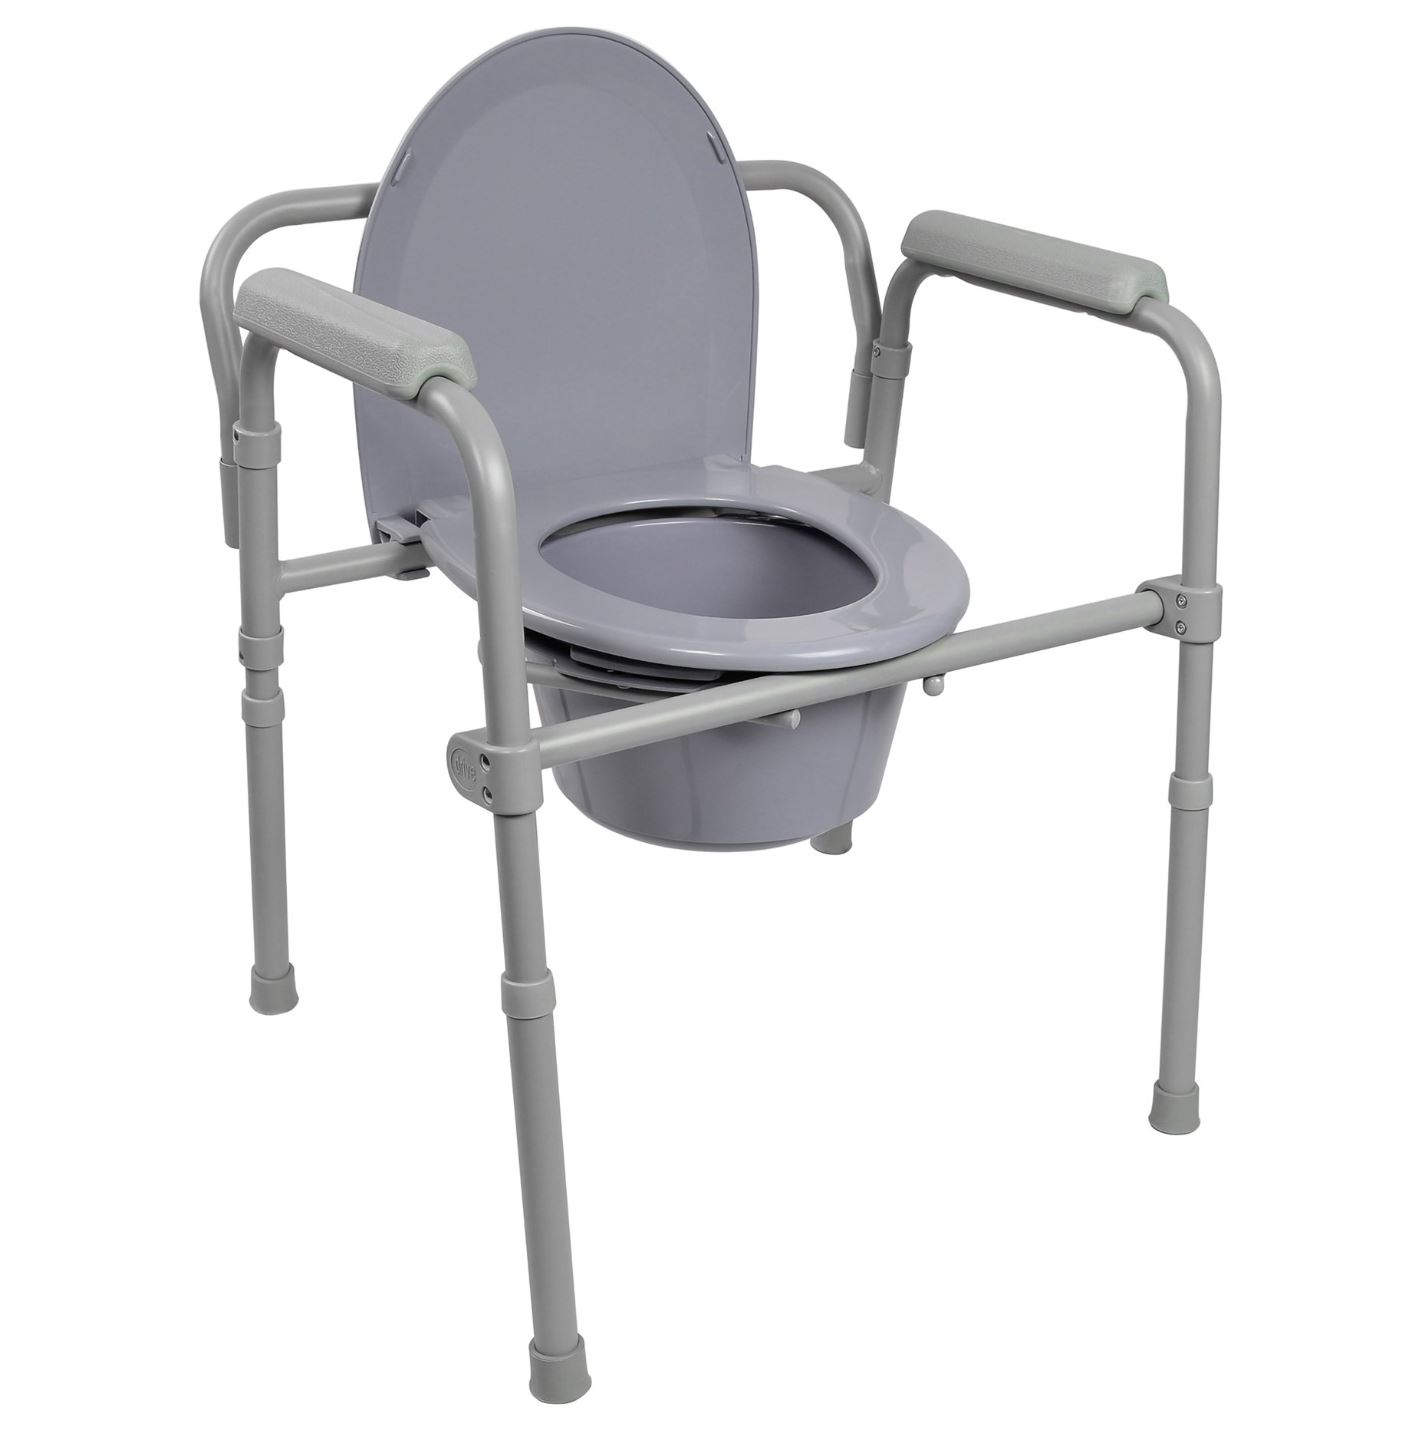 McKesson Commode Chair with Fixed Arm